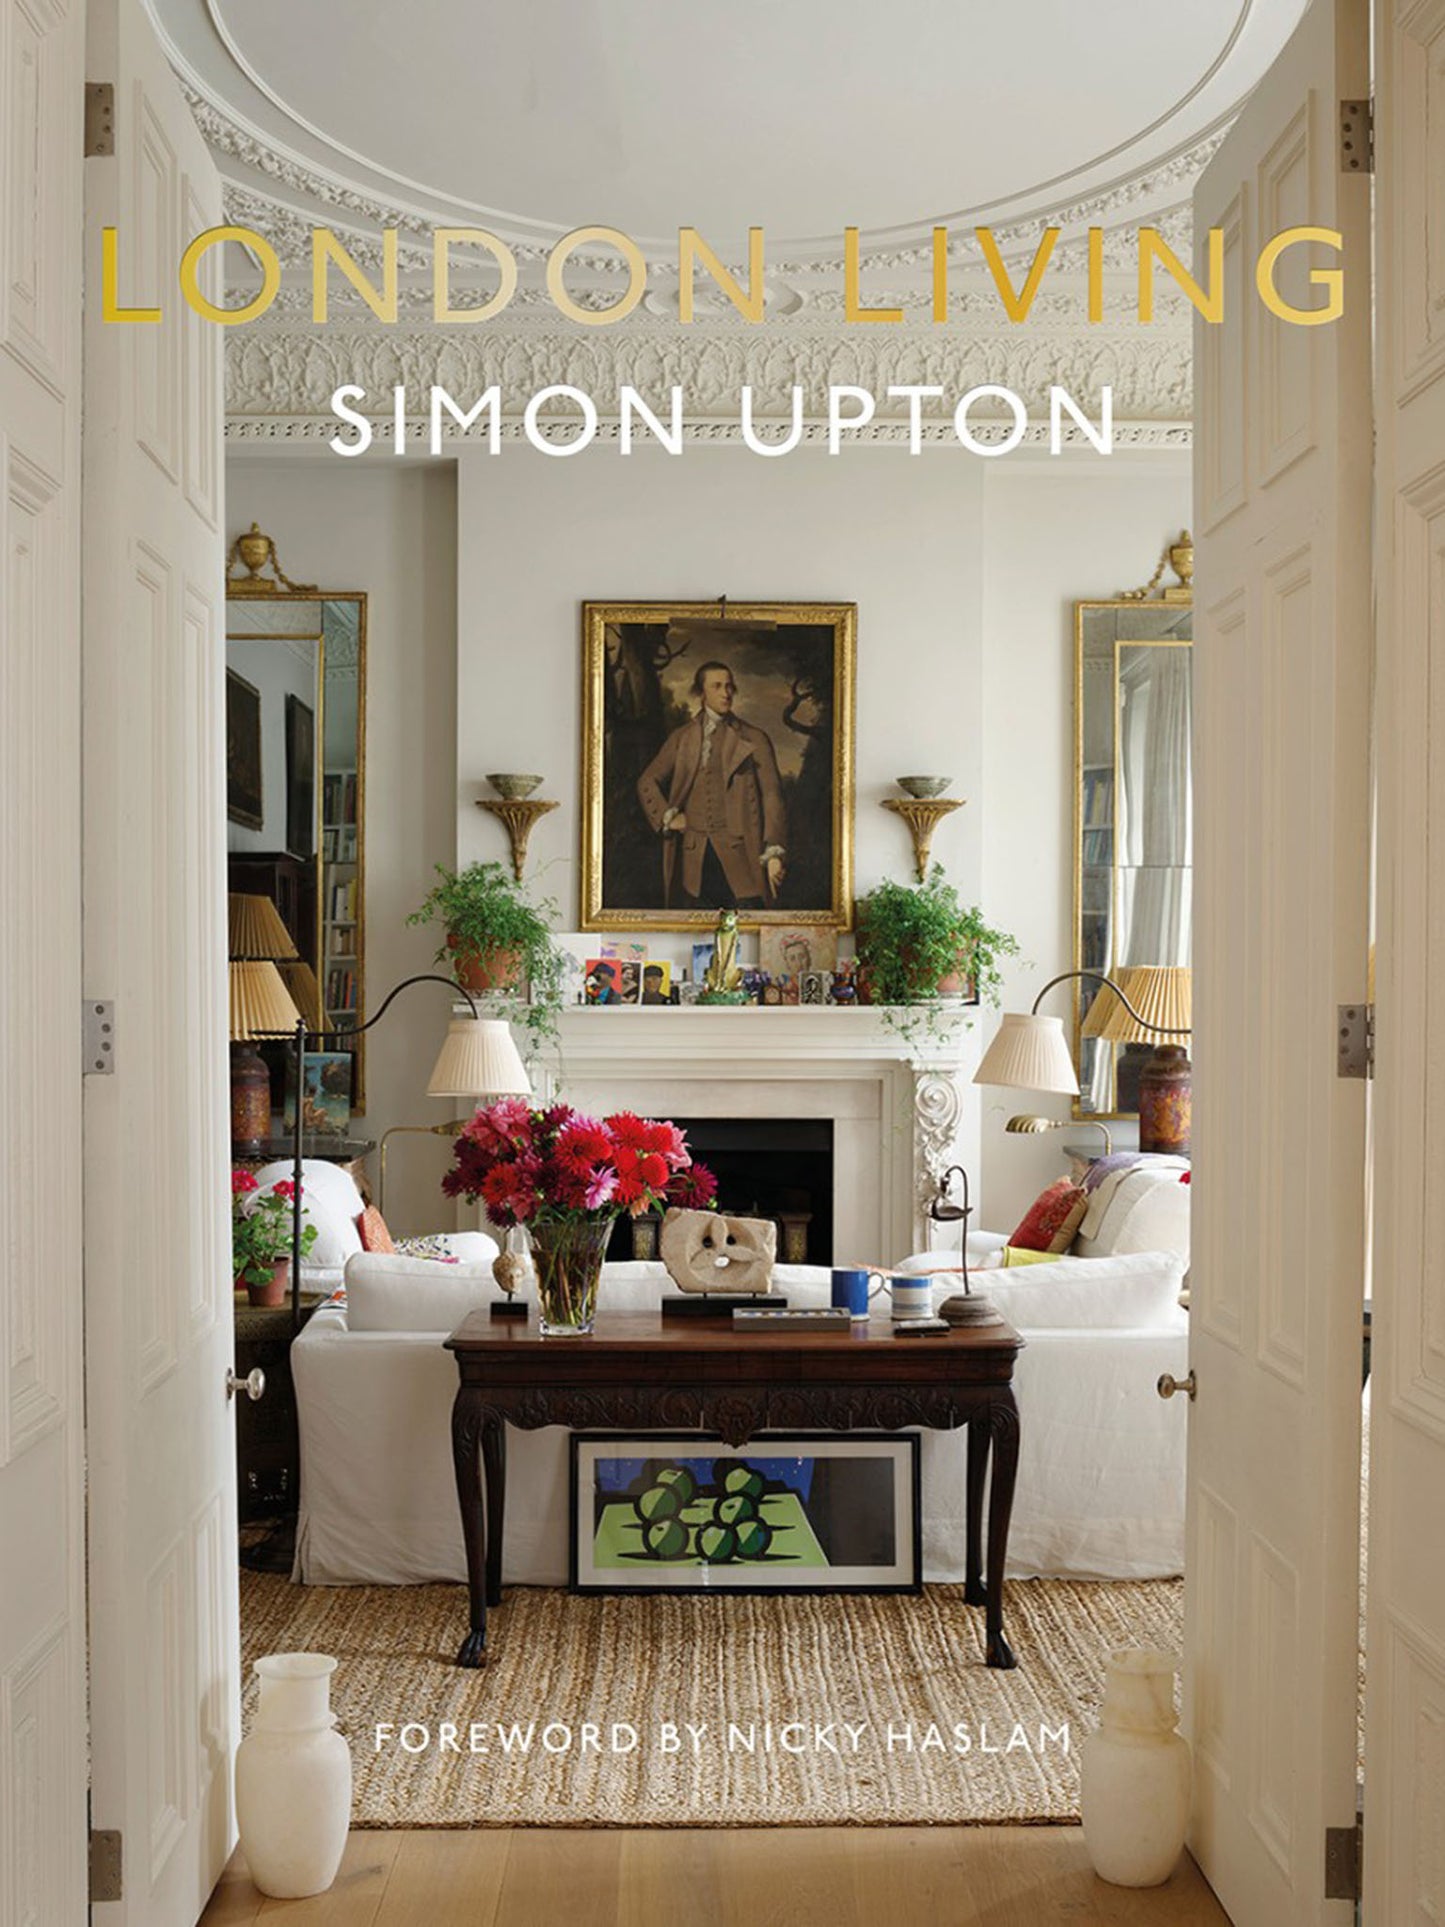 Abrams Publishing London Living: Town and Country